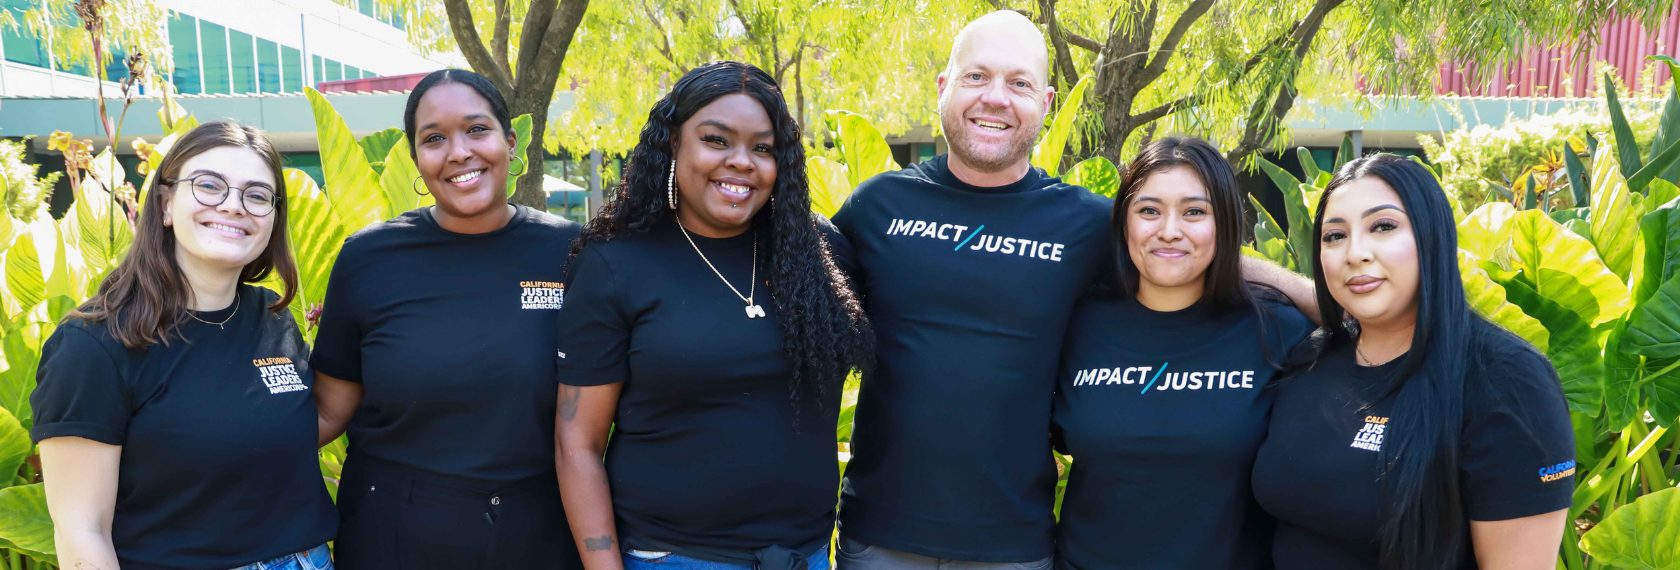 California Justice Leaders members and staff wearing Impact Justice and CJL tshirts.